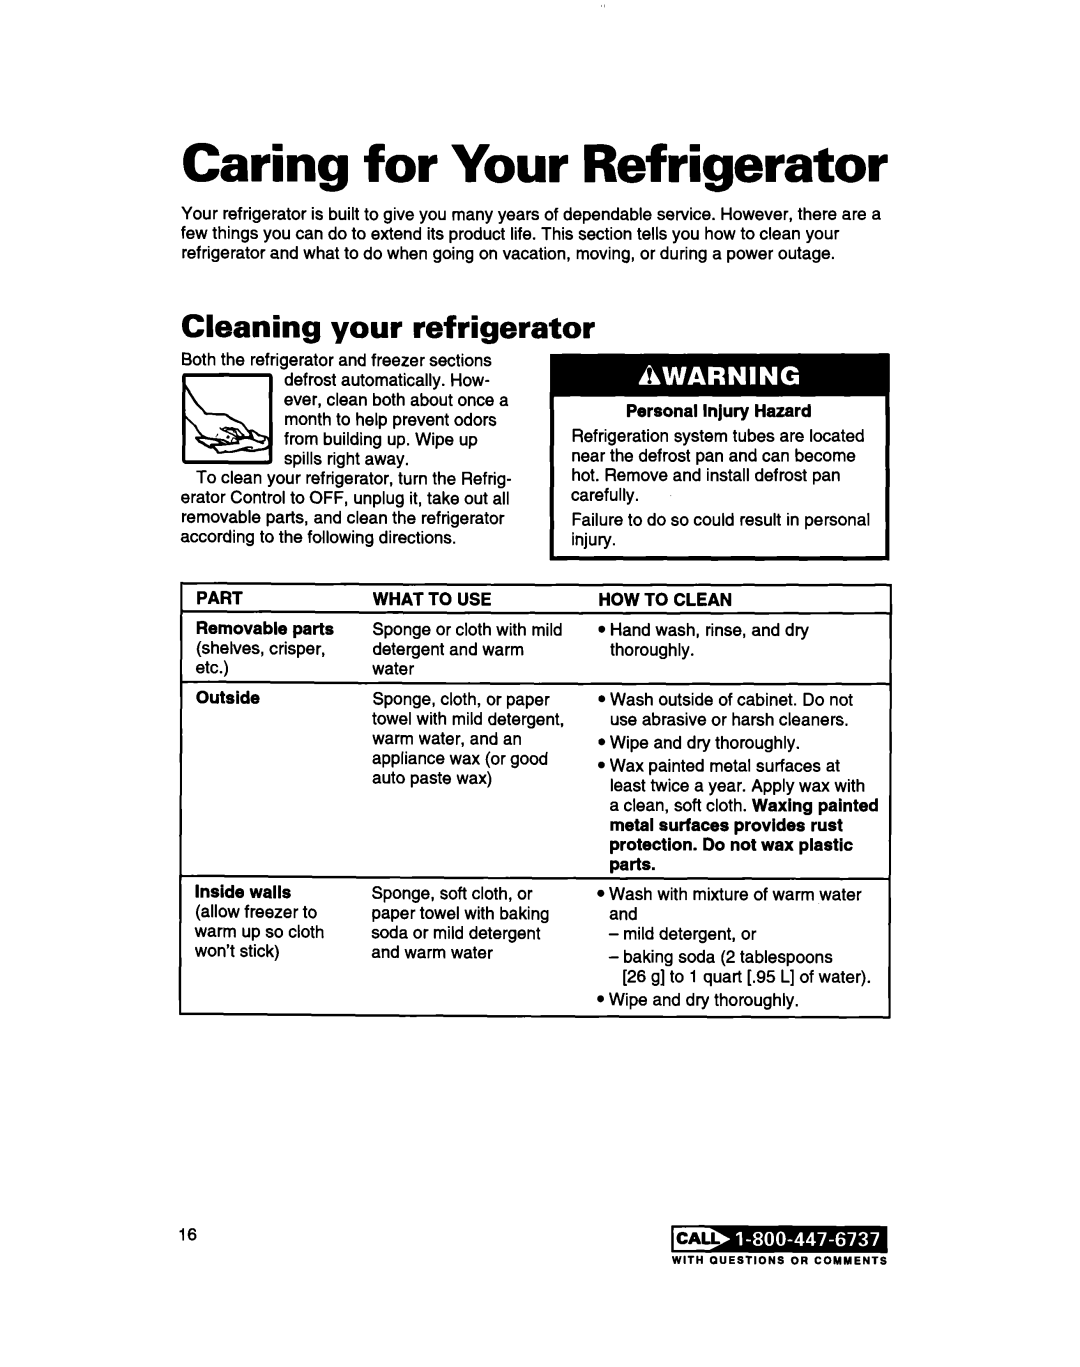 Whirlpool 2183013 warranty Caring for Your Refrigerator, Cleaning your refrigerator 